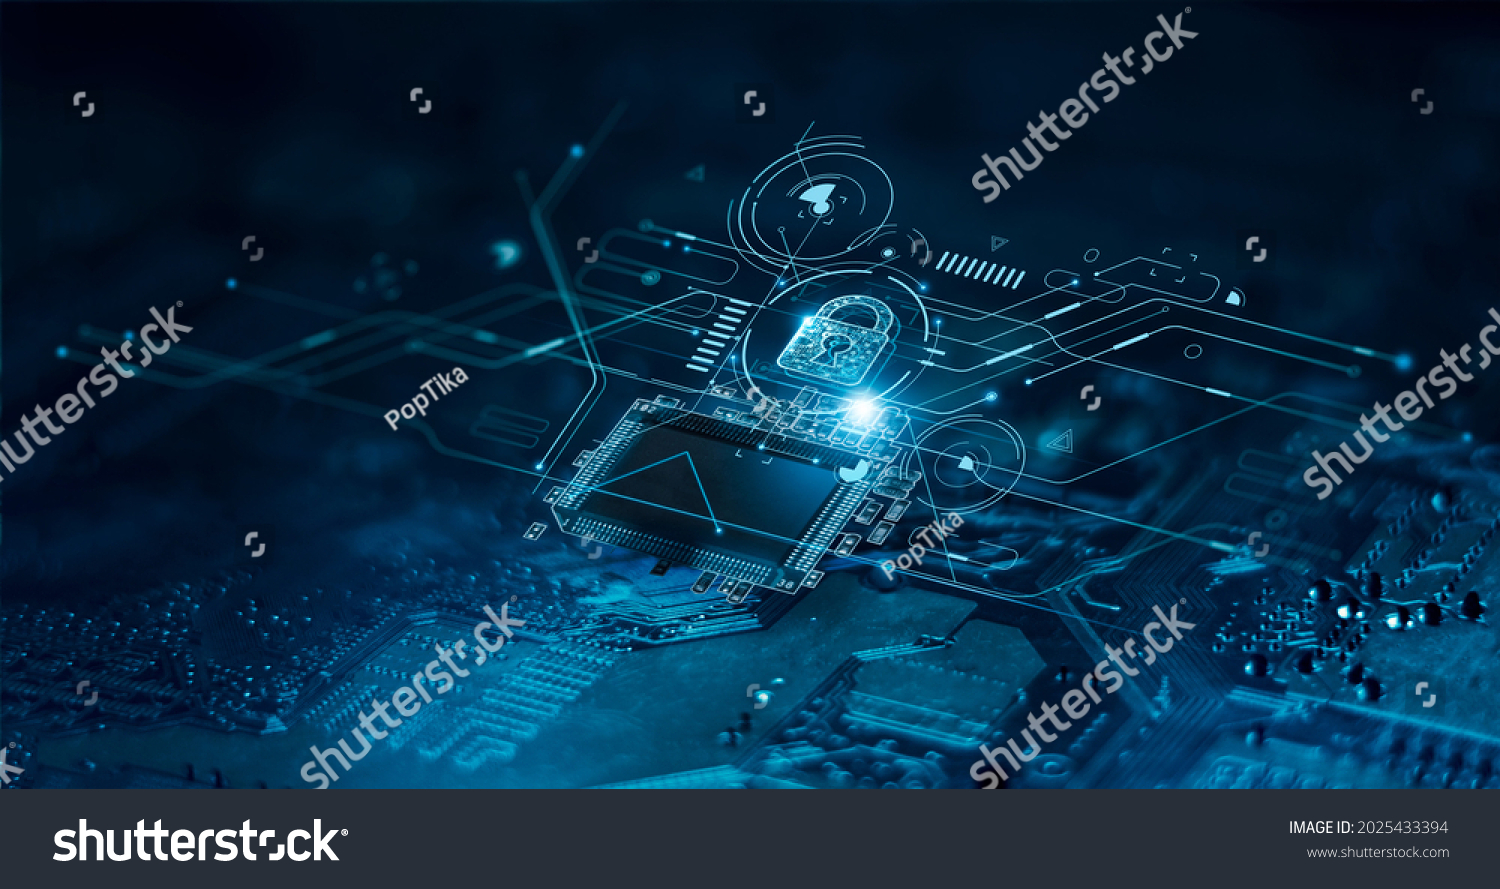 Digital padlock icon, cyber security network and data protection technology on virtual interface screen. Online internet authorized access against cyber attack.and business data privacy concept. #2025433394